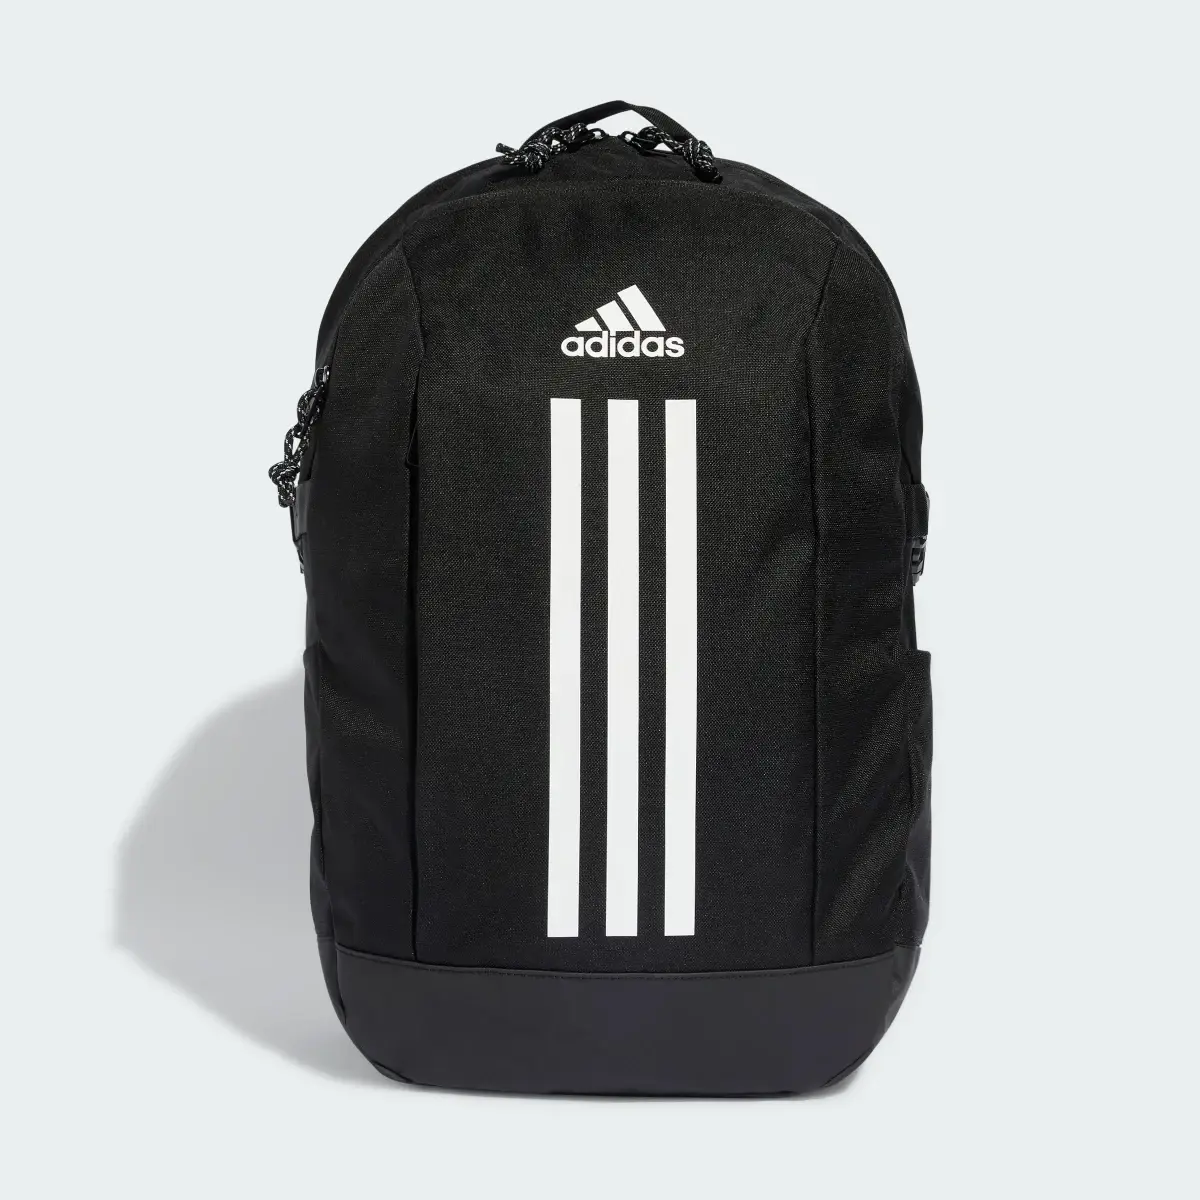 Adidas Power Backpack. 2